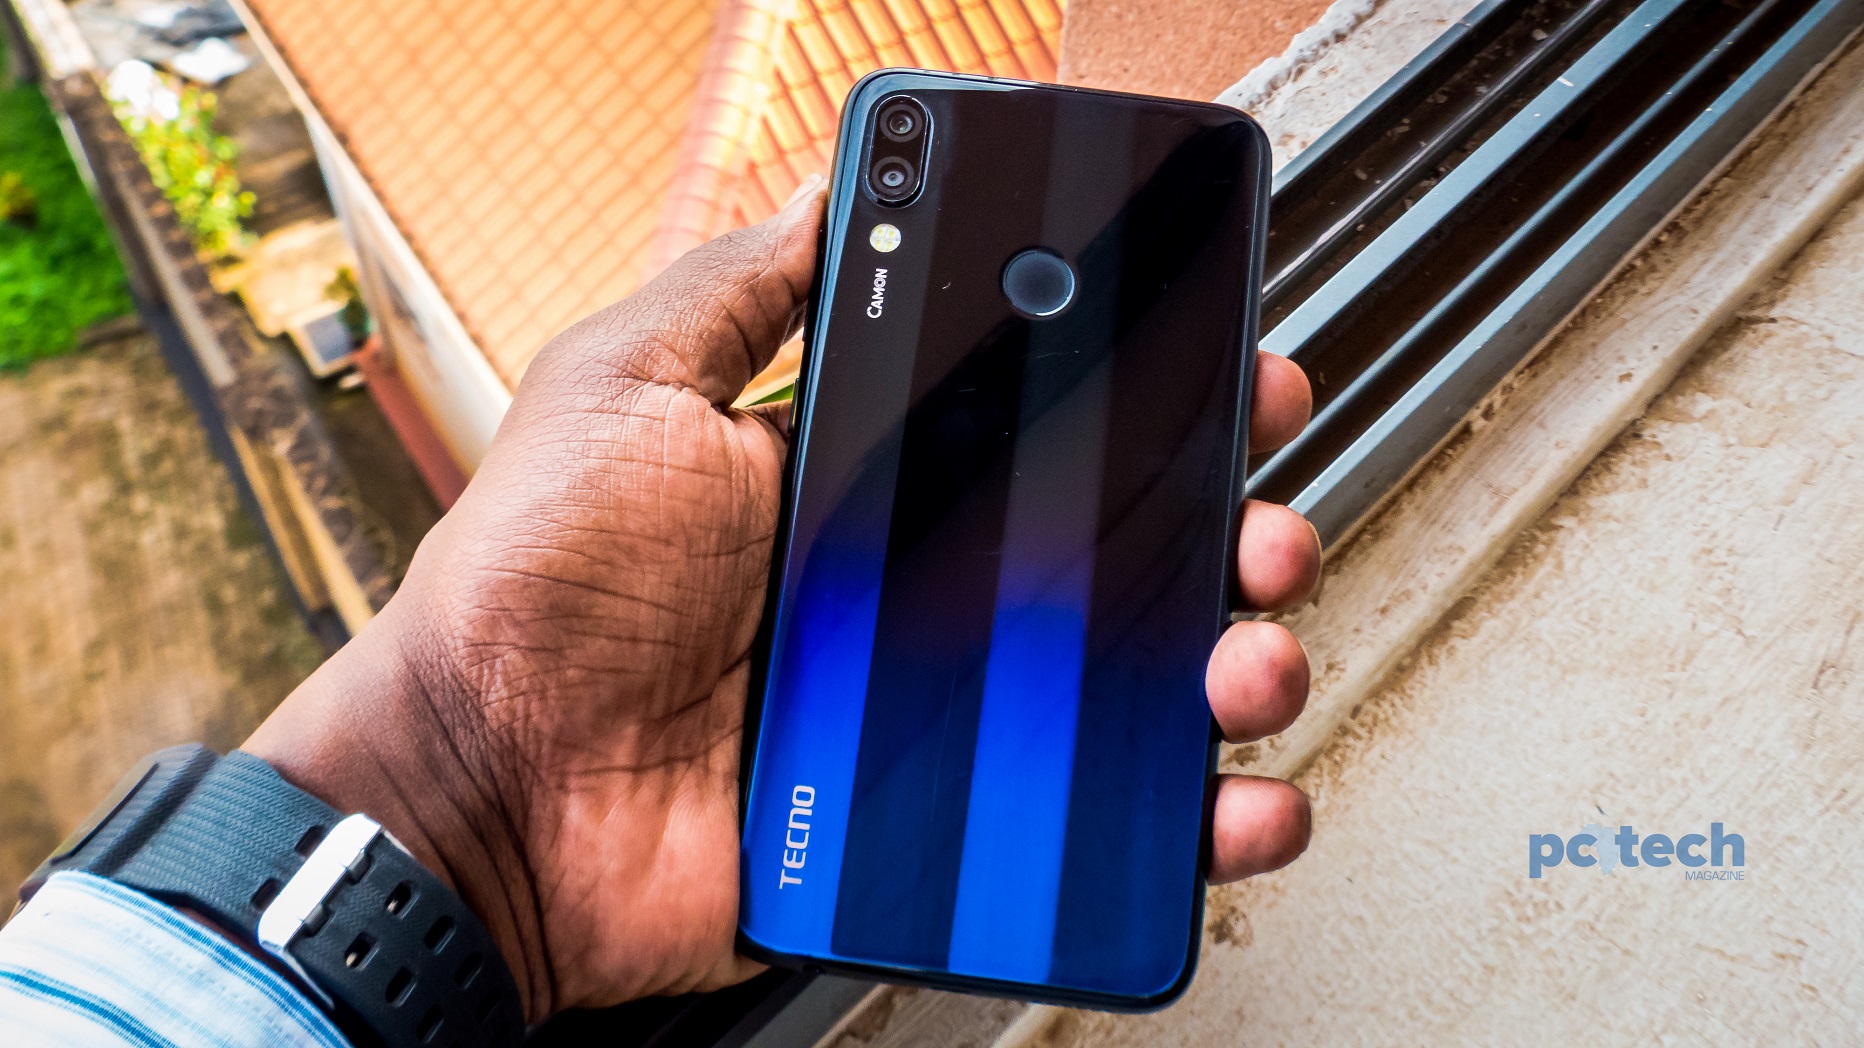 Photo of Tecno Camon 11 Pro Full Review: A Built Device With Good Looks & Average Performance